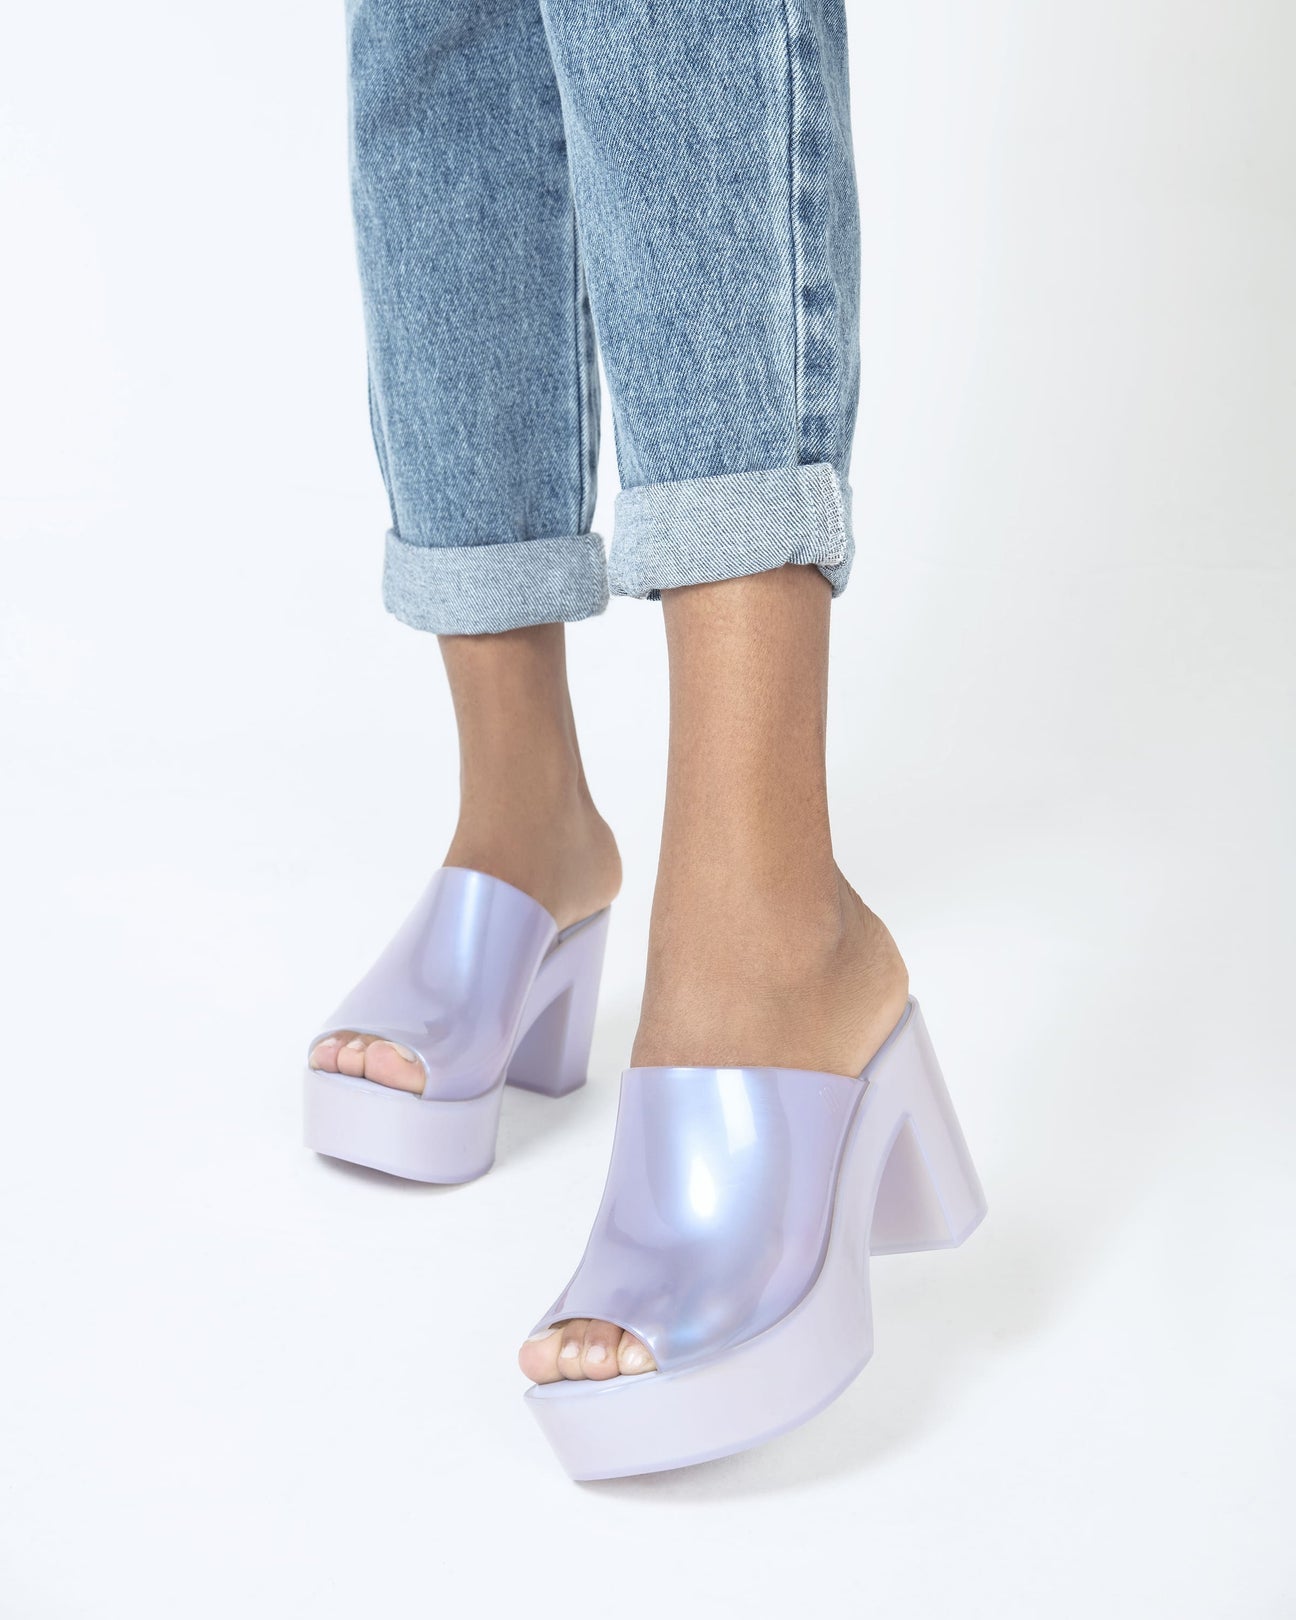 New Must Have Mules